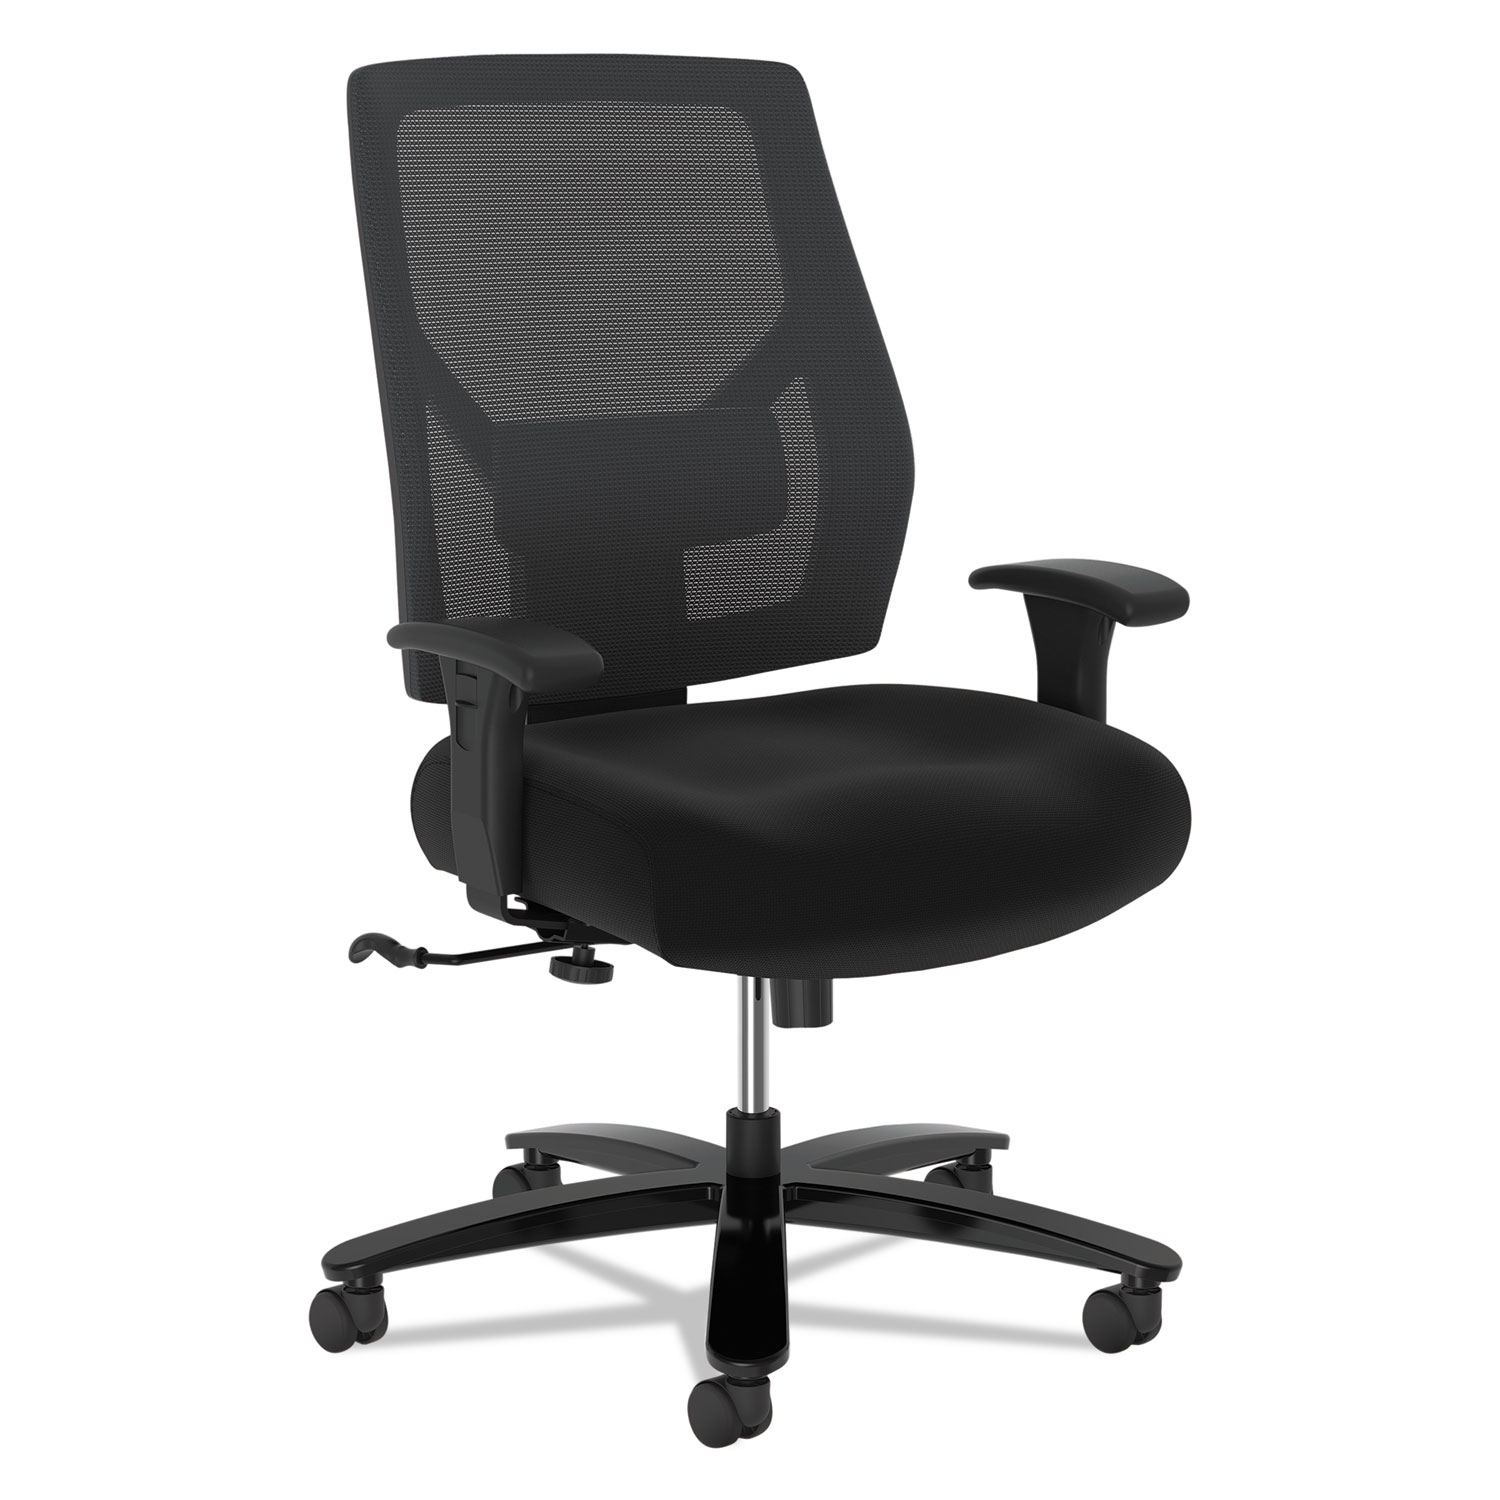 HON Crio High-Back Big and Tall Chair - Fabric Mesh Back Computer Chair for Office Desk, Black (HVL581)